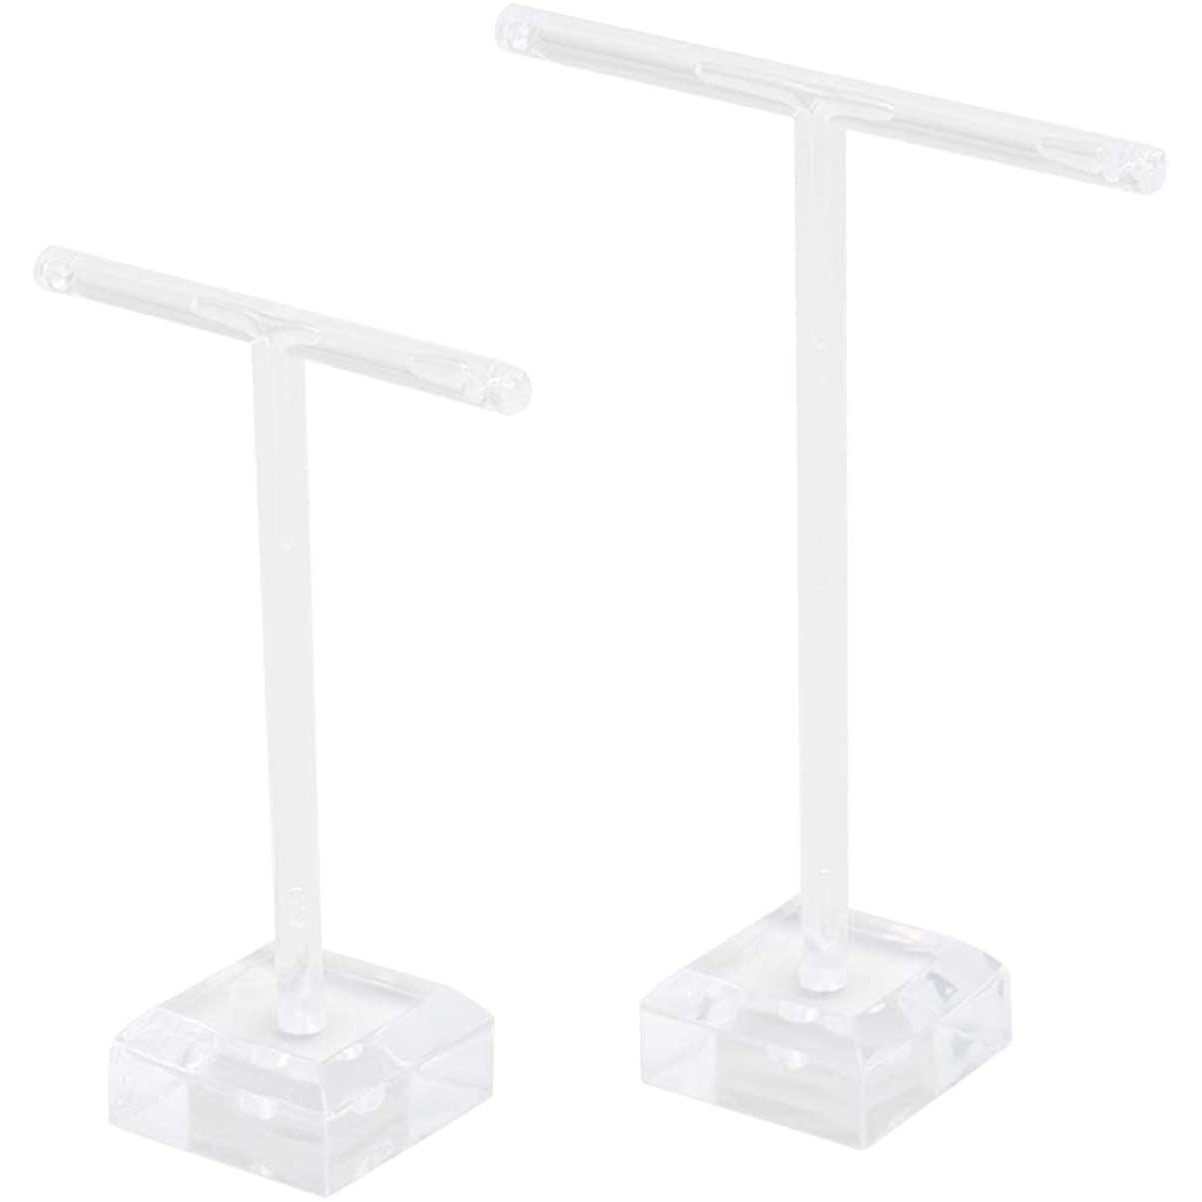 2Pcs Acrylic Earrings Necklace Jewelry Display Rack T Bar Stand Holder Organizer 